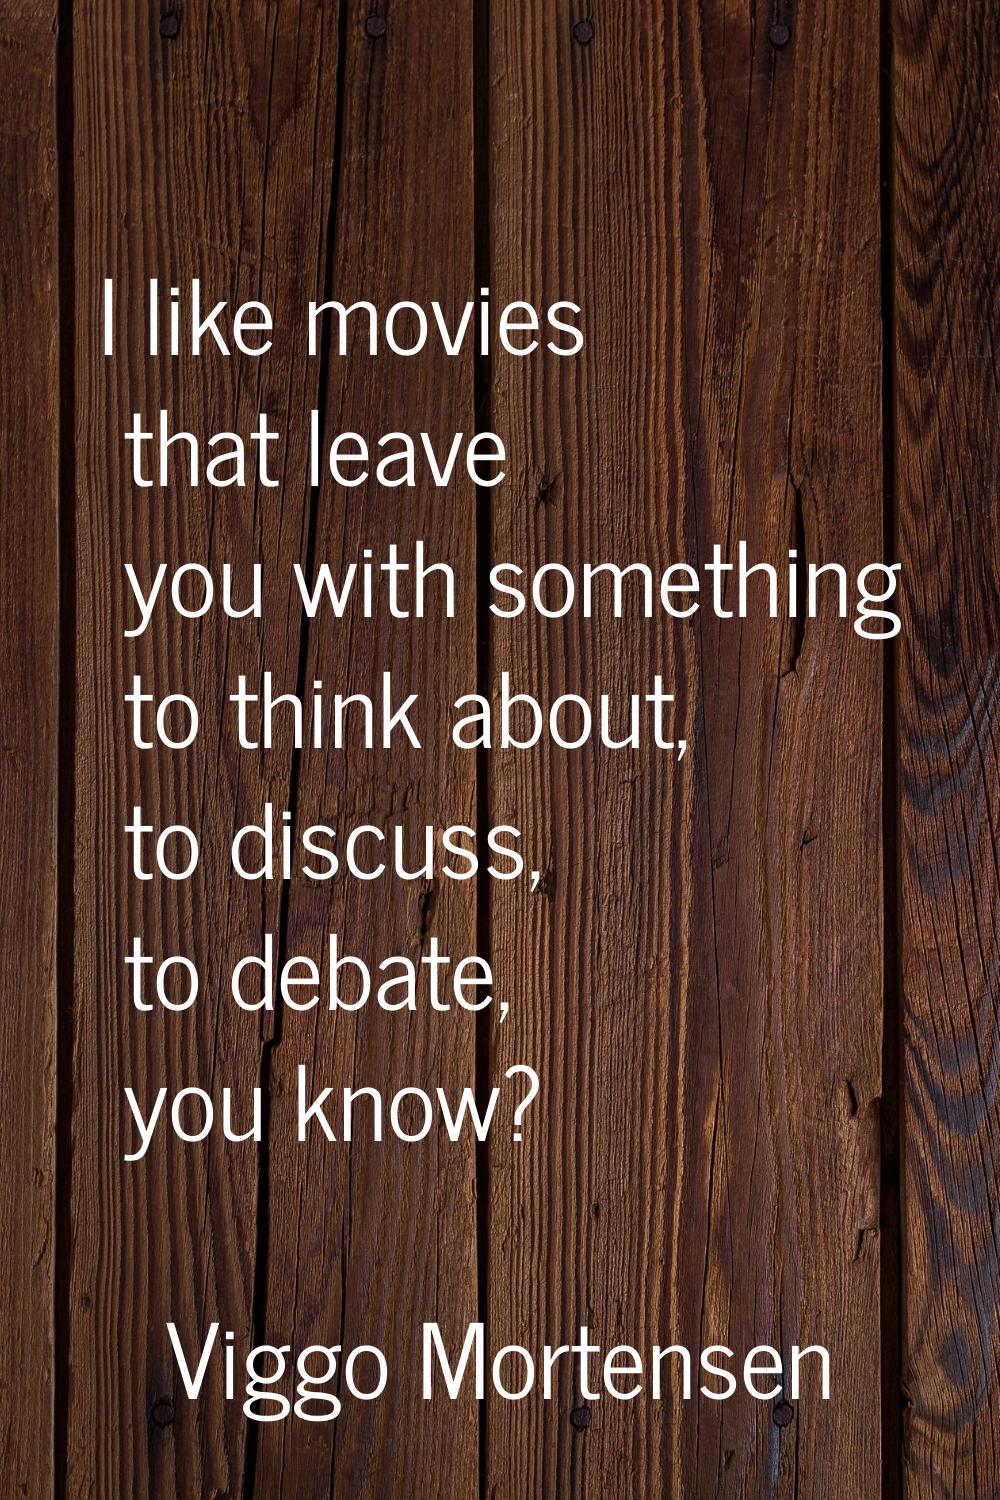 I like movies that leave you with something to think about, to discuss, to debate, you know?